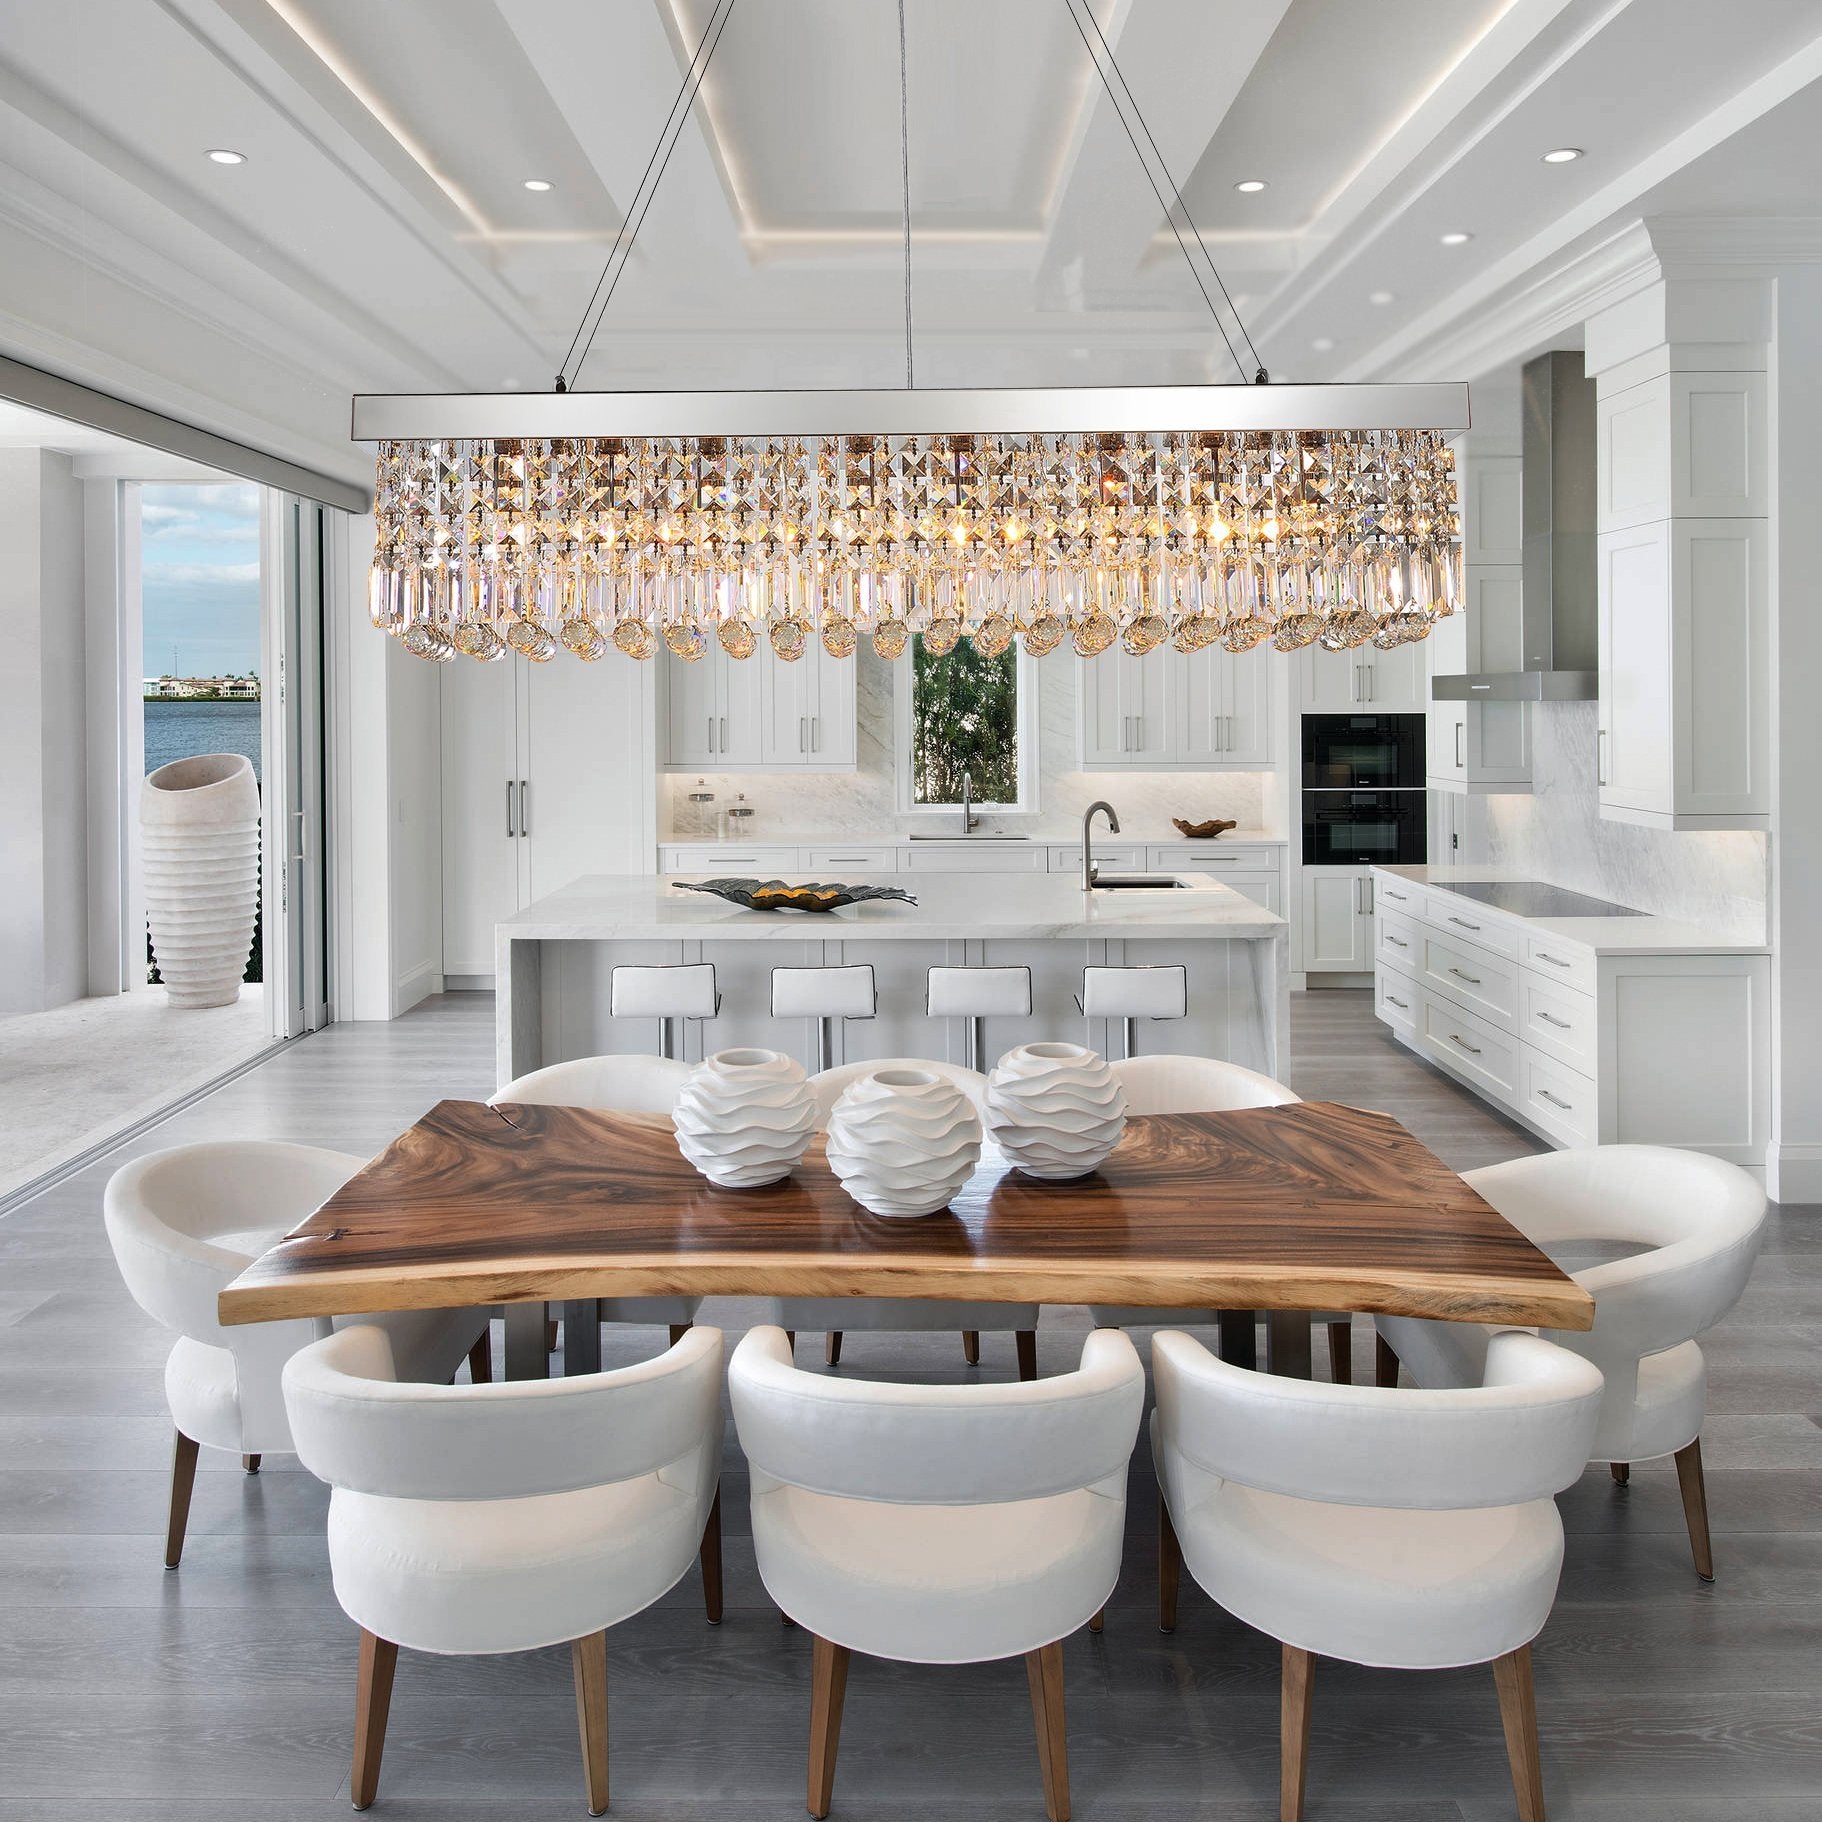 crystal chandeliers for dining room